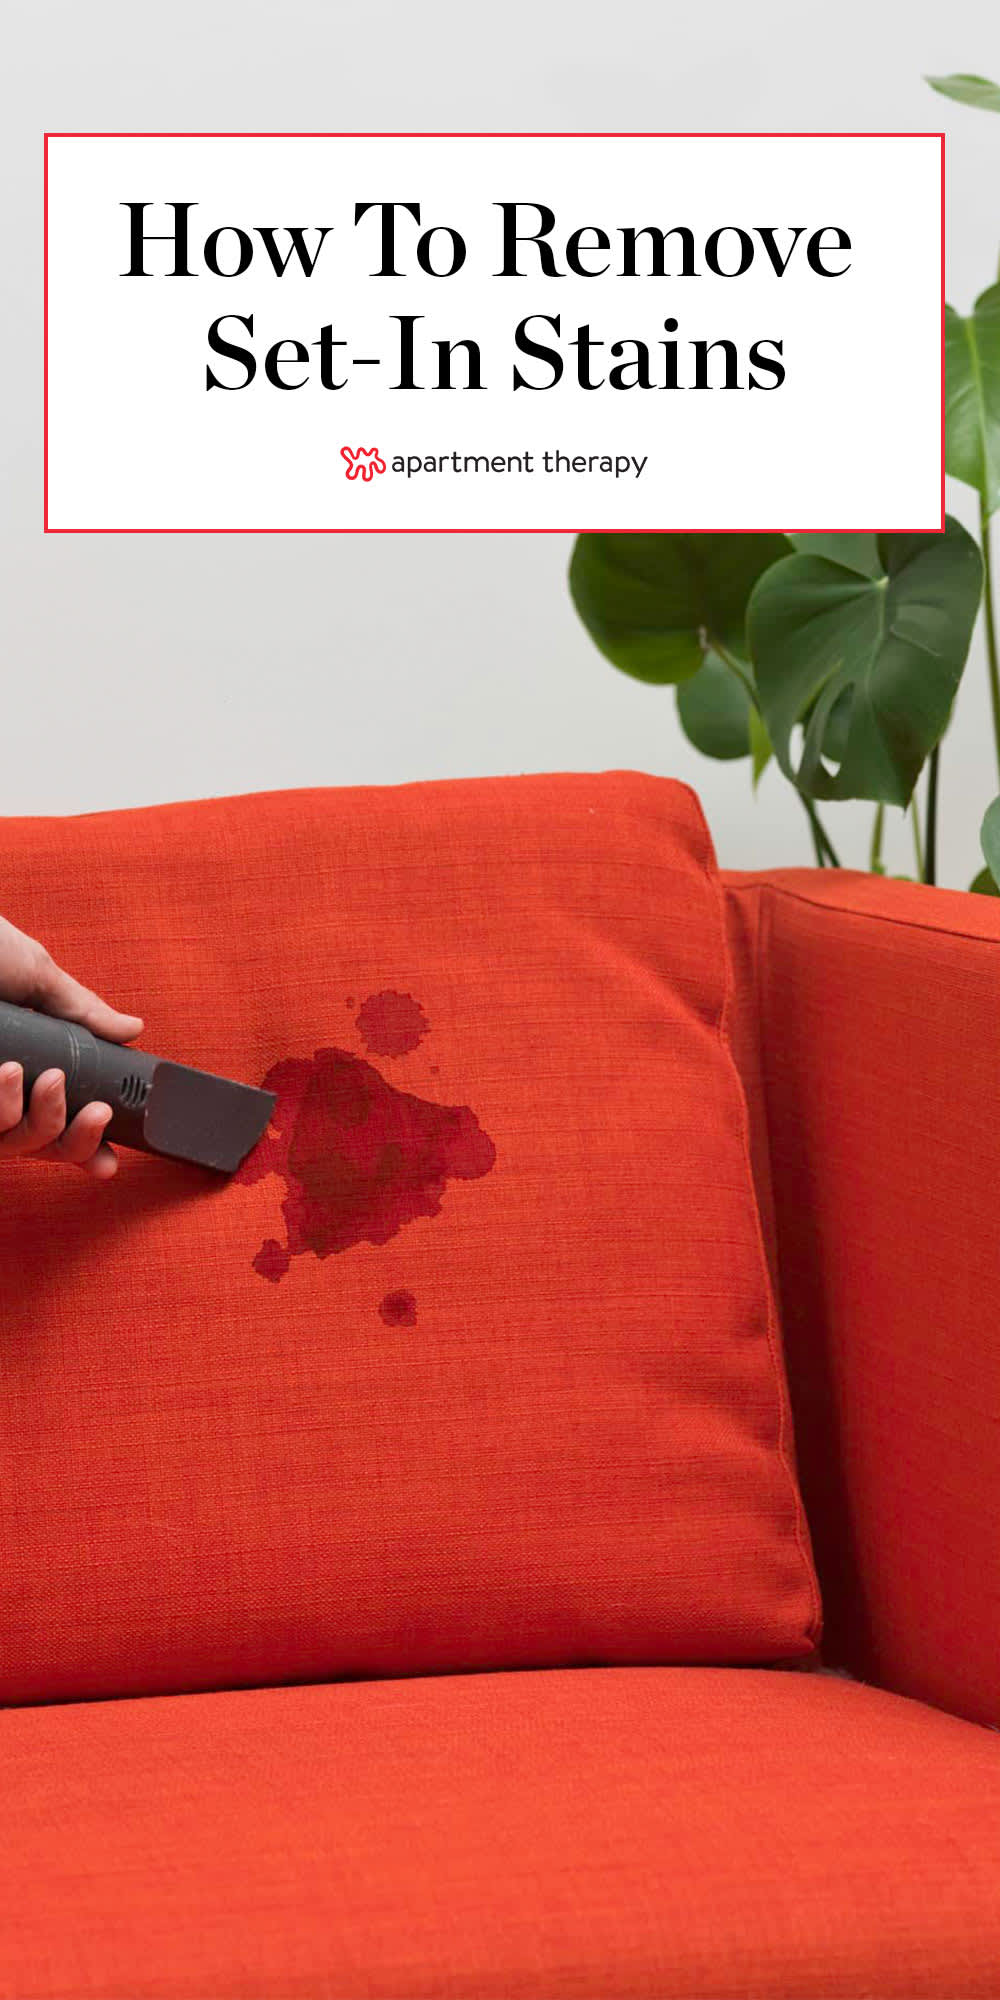 How to Clean Upholstery & Couch Stains - Remove Couch